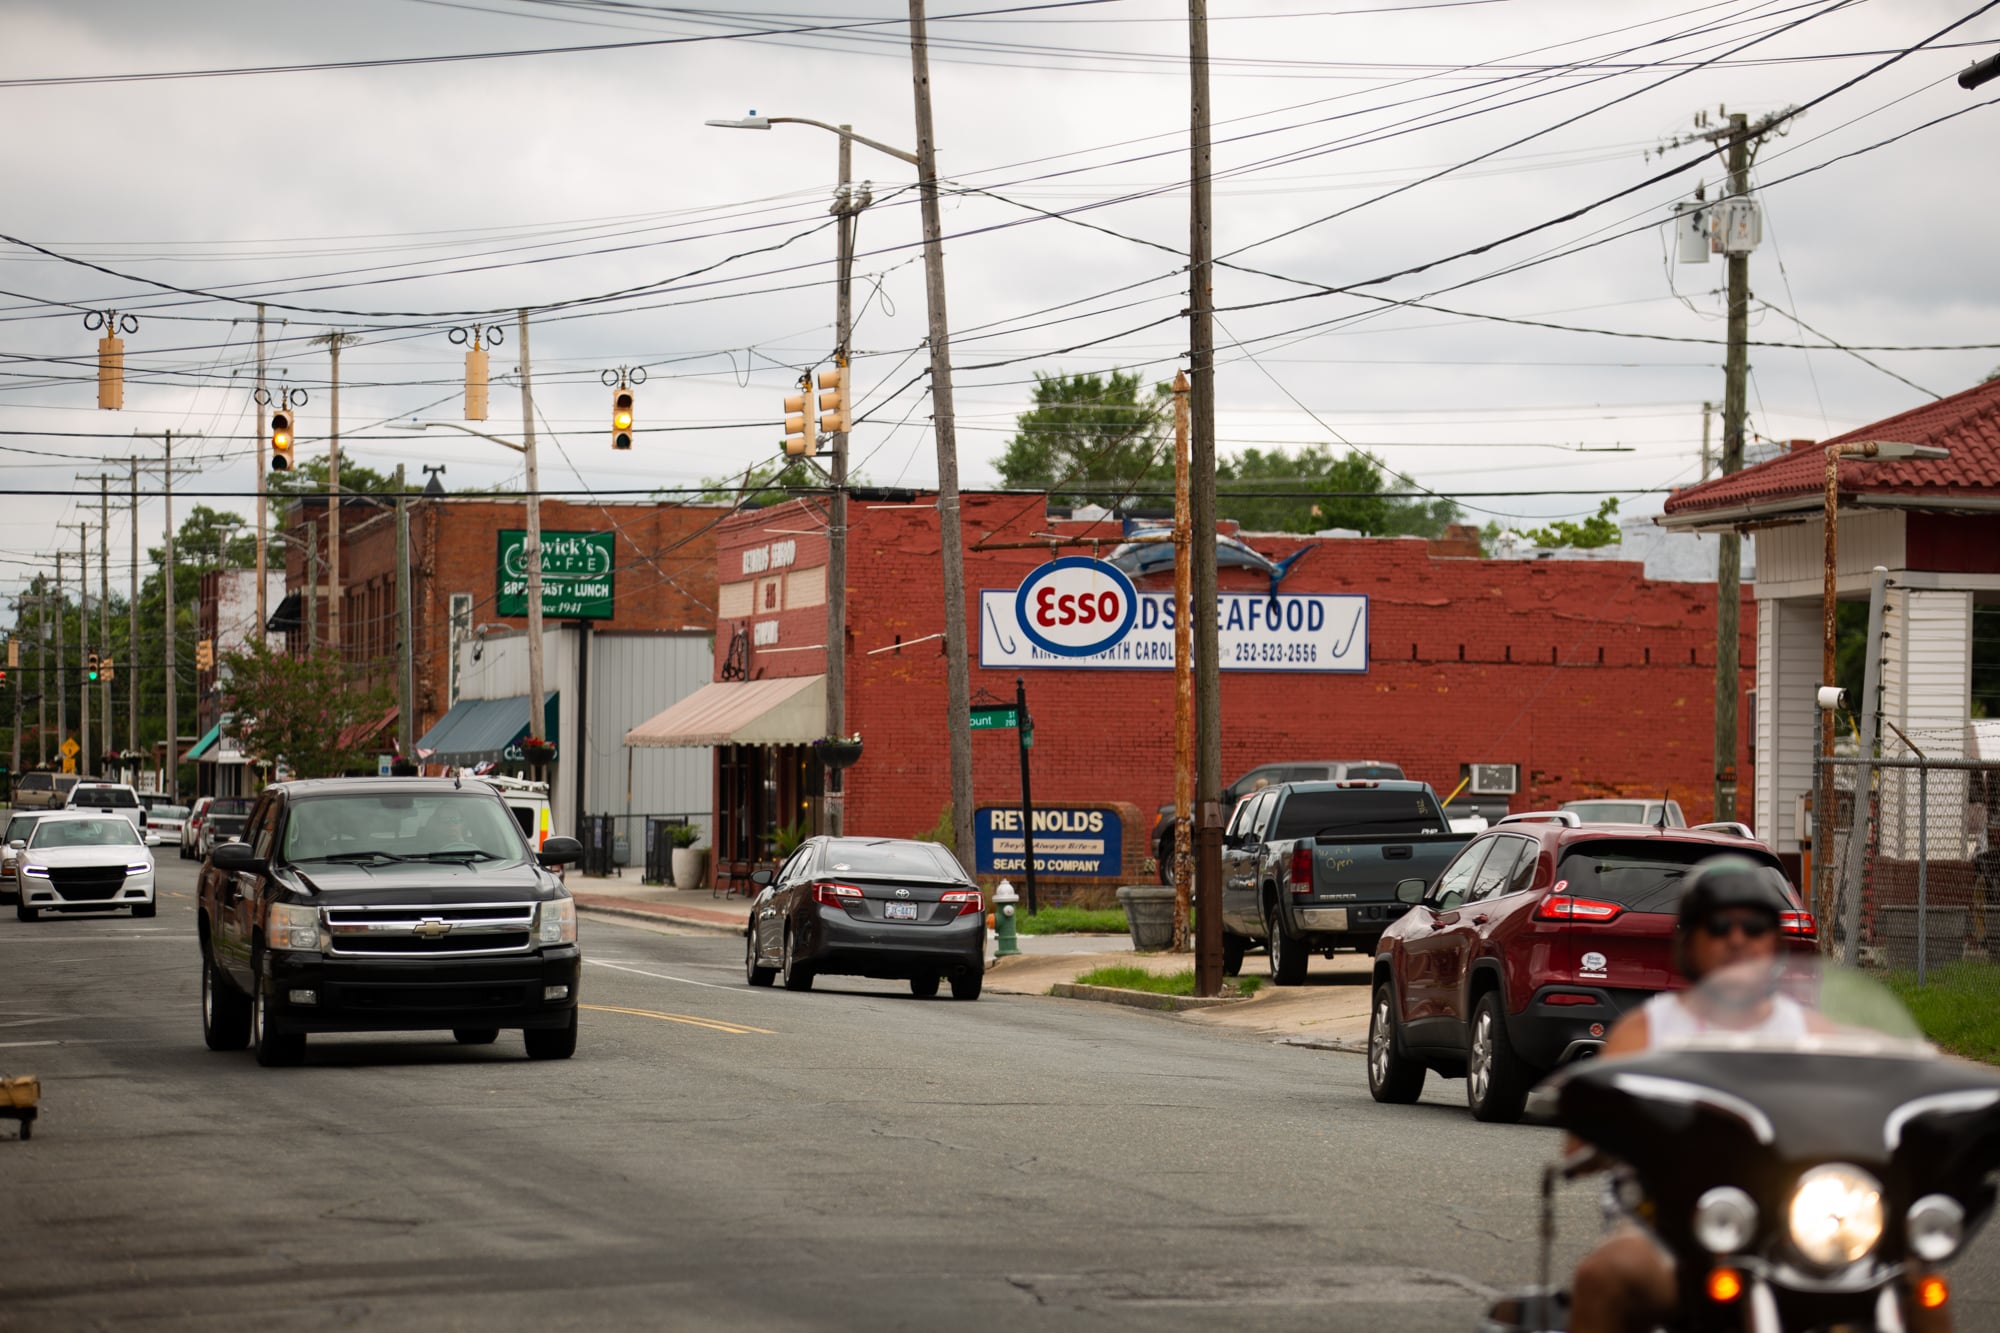 Kinston is on the coastal plains in eastern North Carolina, home to some of the most economically disadvantaged people in the Tar Heel State. Out of the 41 counties that comprise the region, 28 are among the most economically distressed, the North Carolina Department of Commerce reports. (Harrison Mantas/ News21)